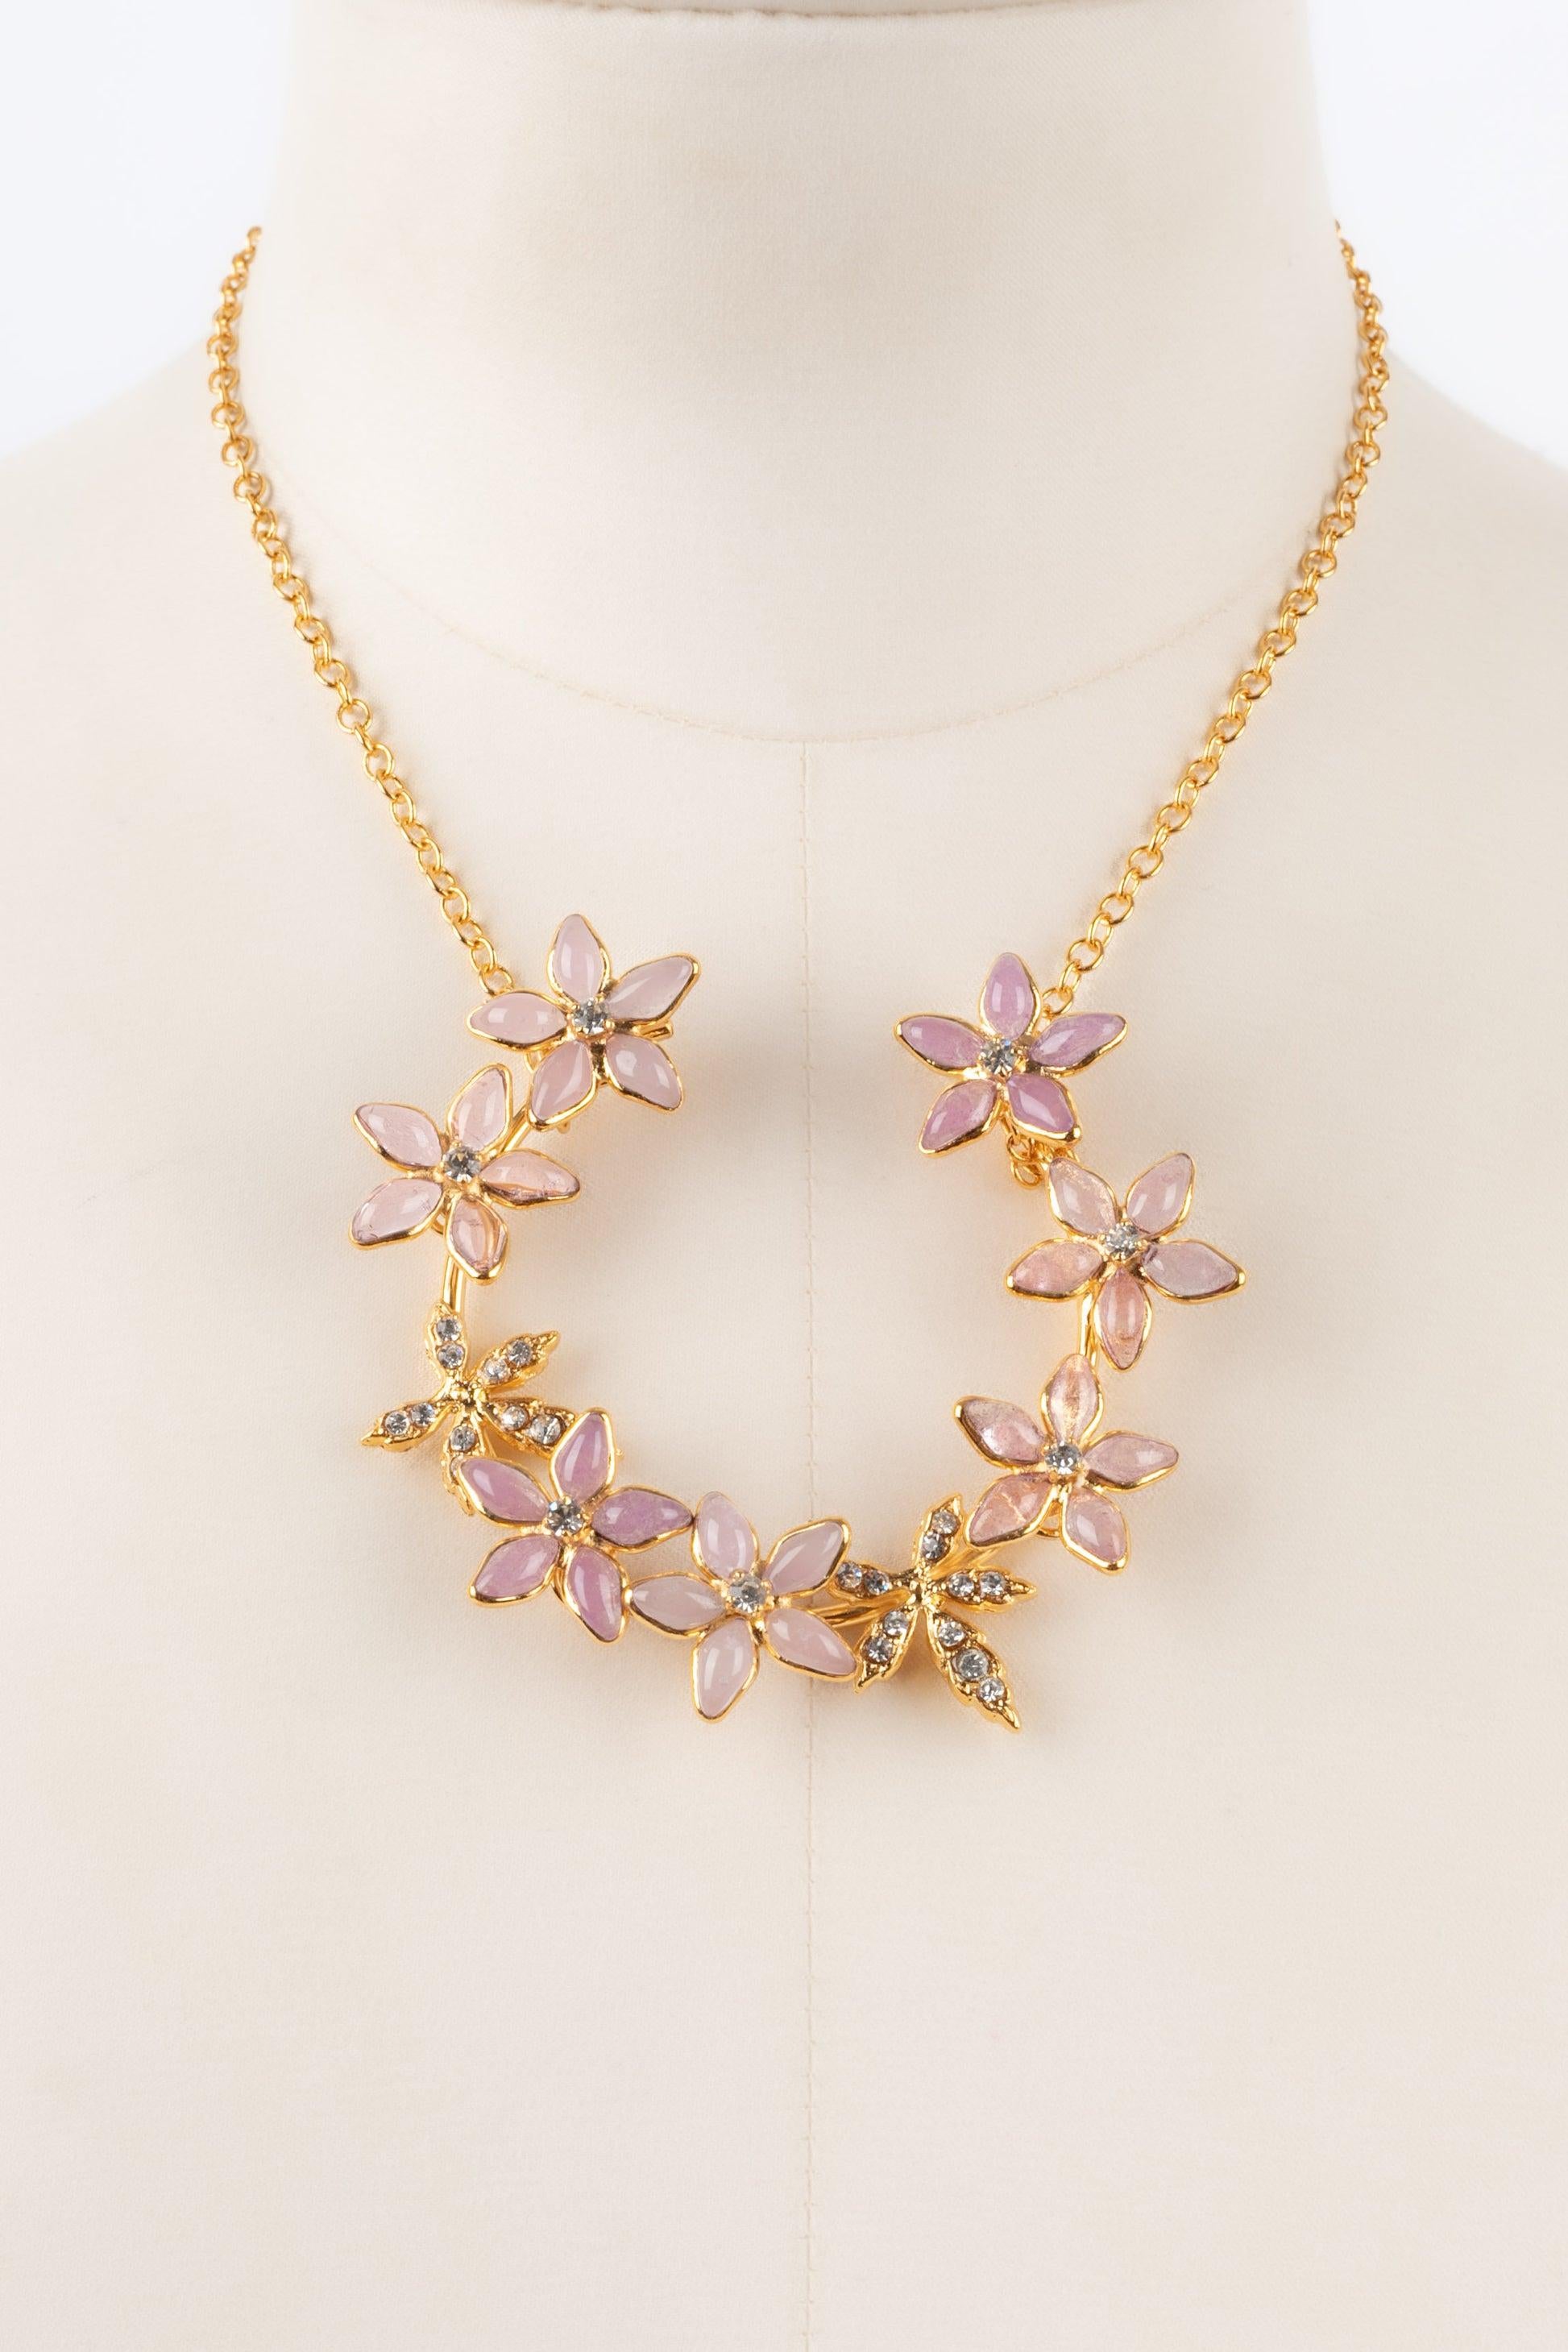 Augustine Golden Metal Necklace with Rhinestones and Glass Paste Pale Pink Tones In Excellent Condition For Sale In SAINT-OUEN-SUR-SEINE, FR